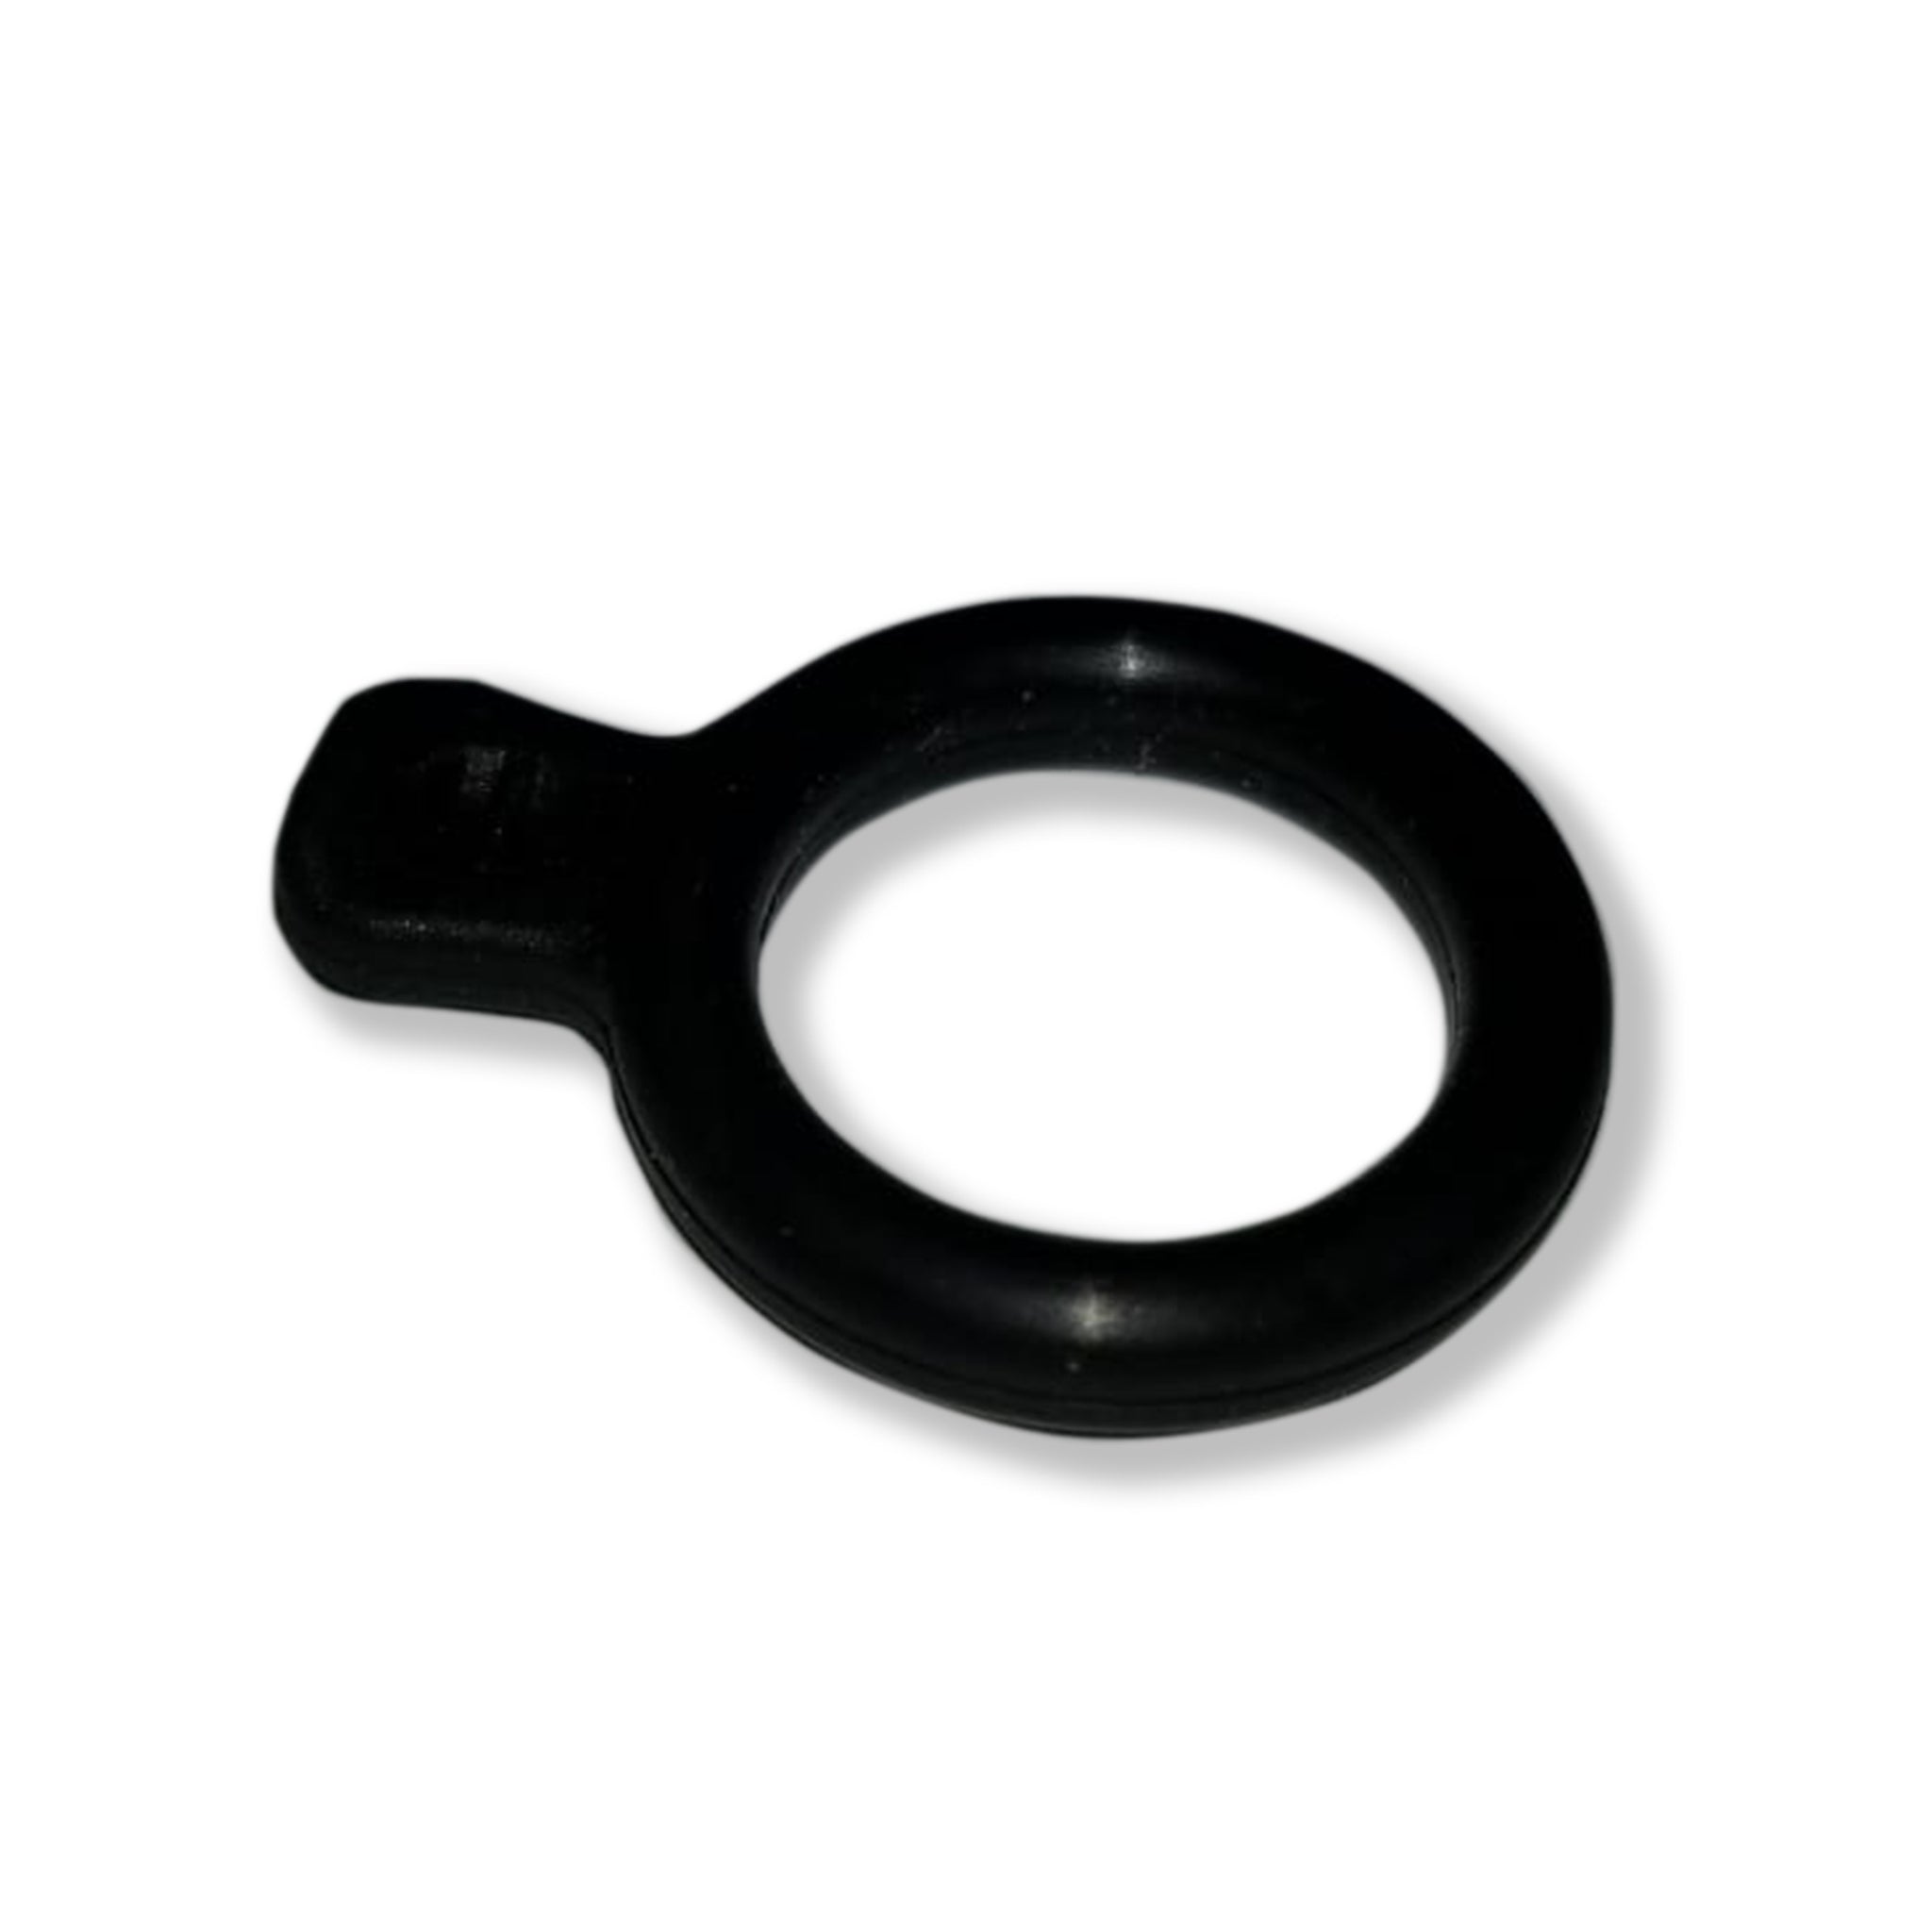 North LockGuard Safety Ring with pull tab set 10 2020